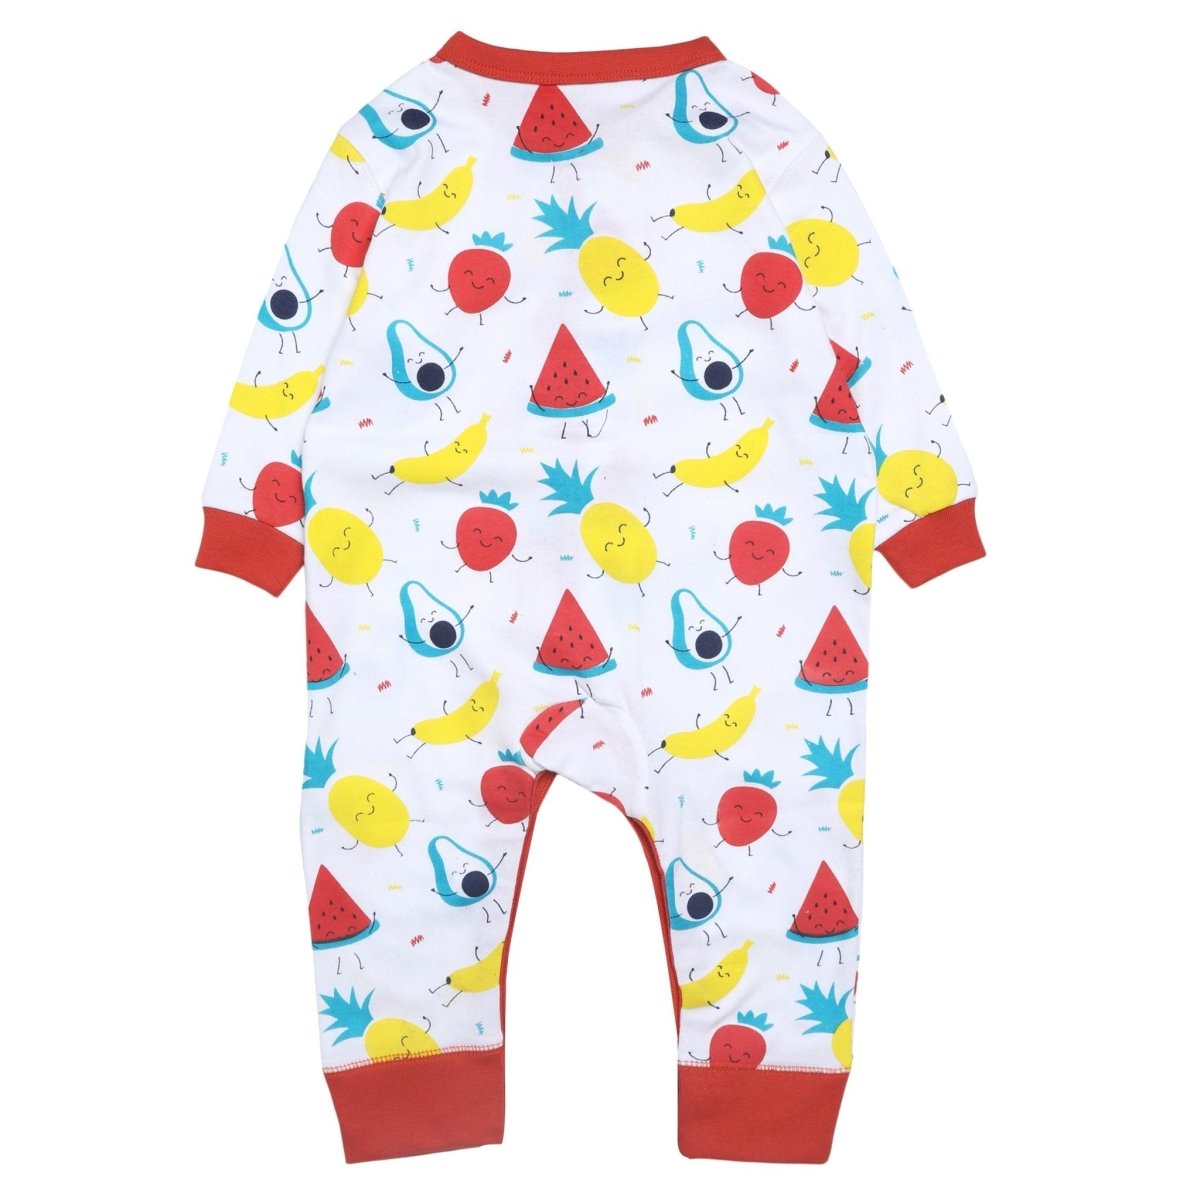 Baby Romper - Fruity Cutie - ROM-FRCT-0-6